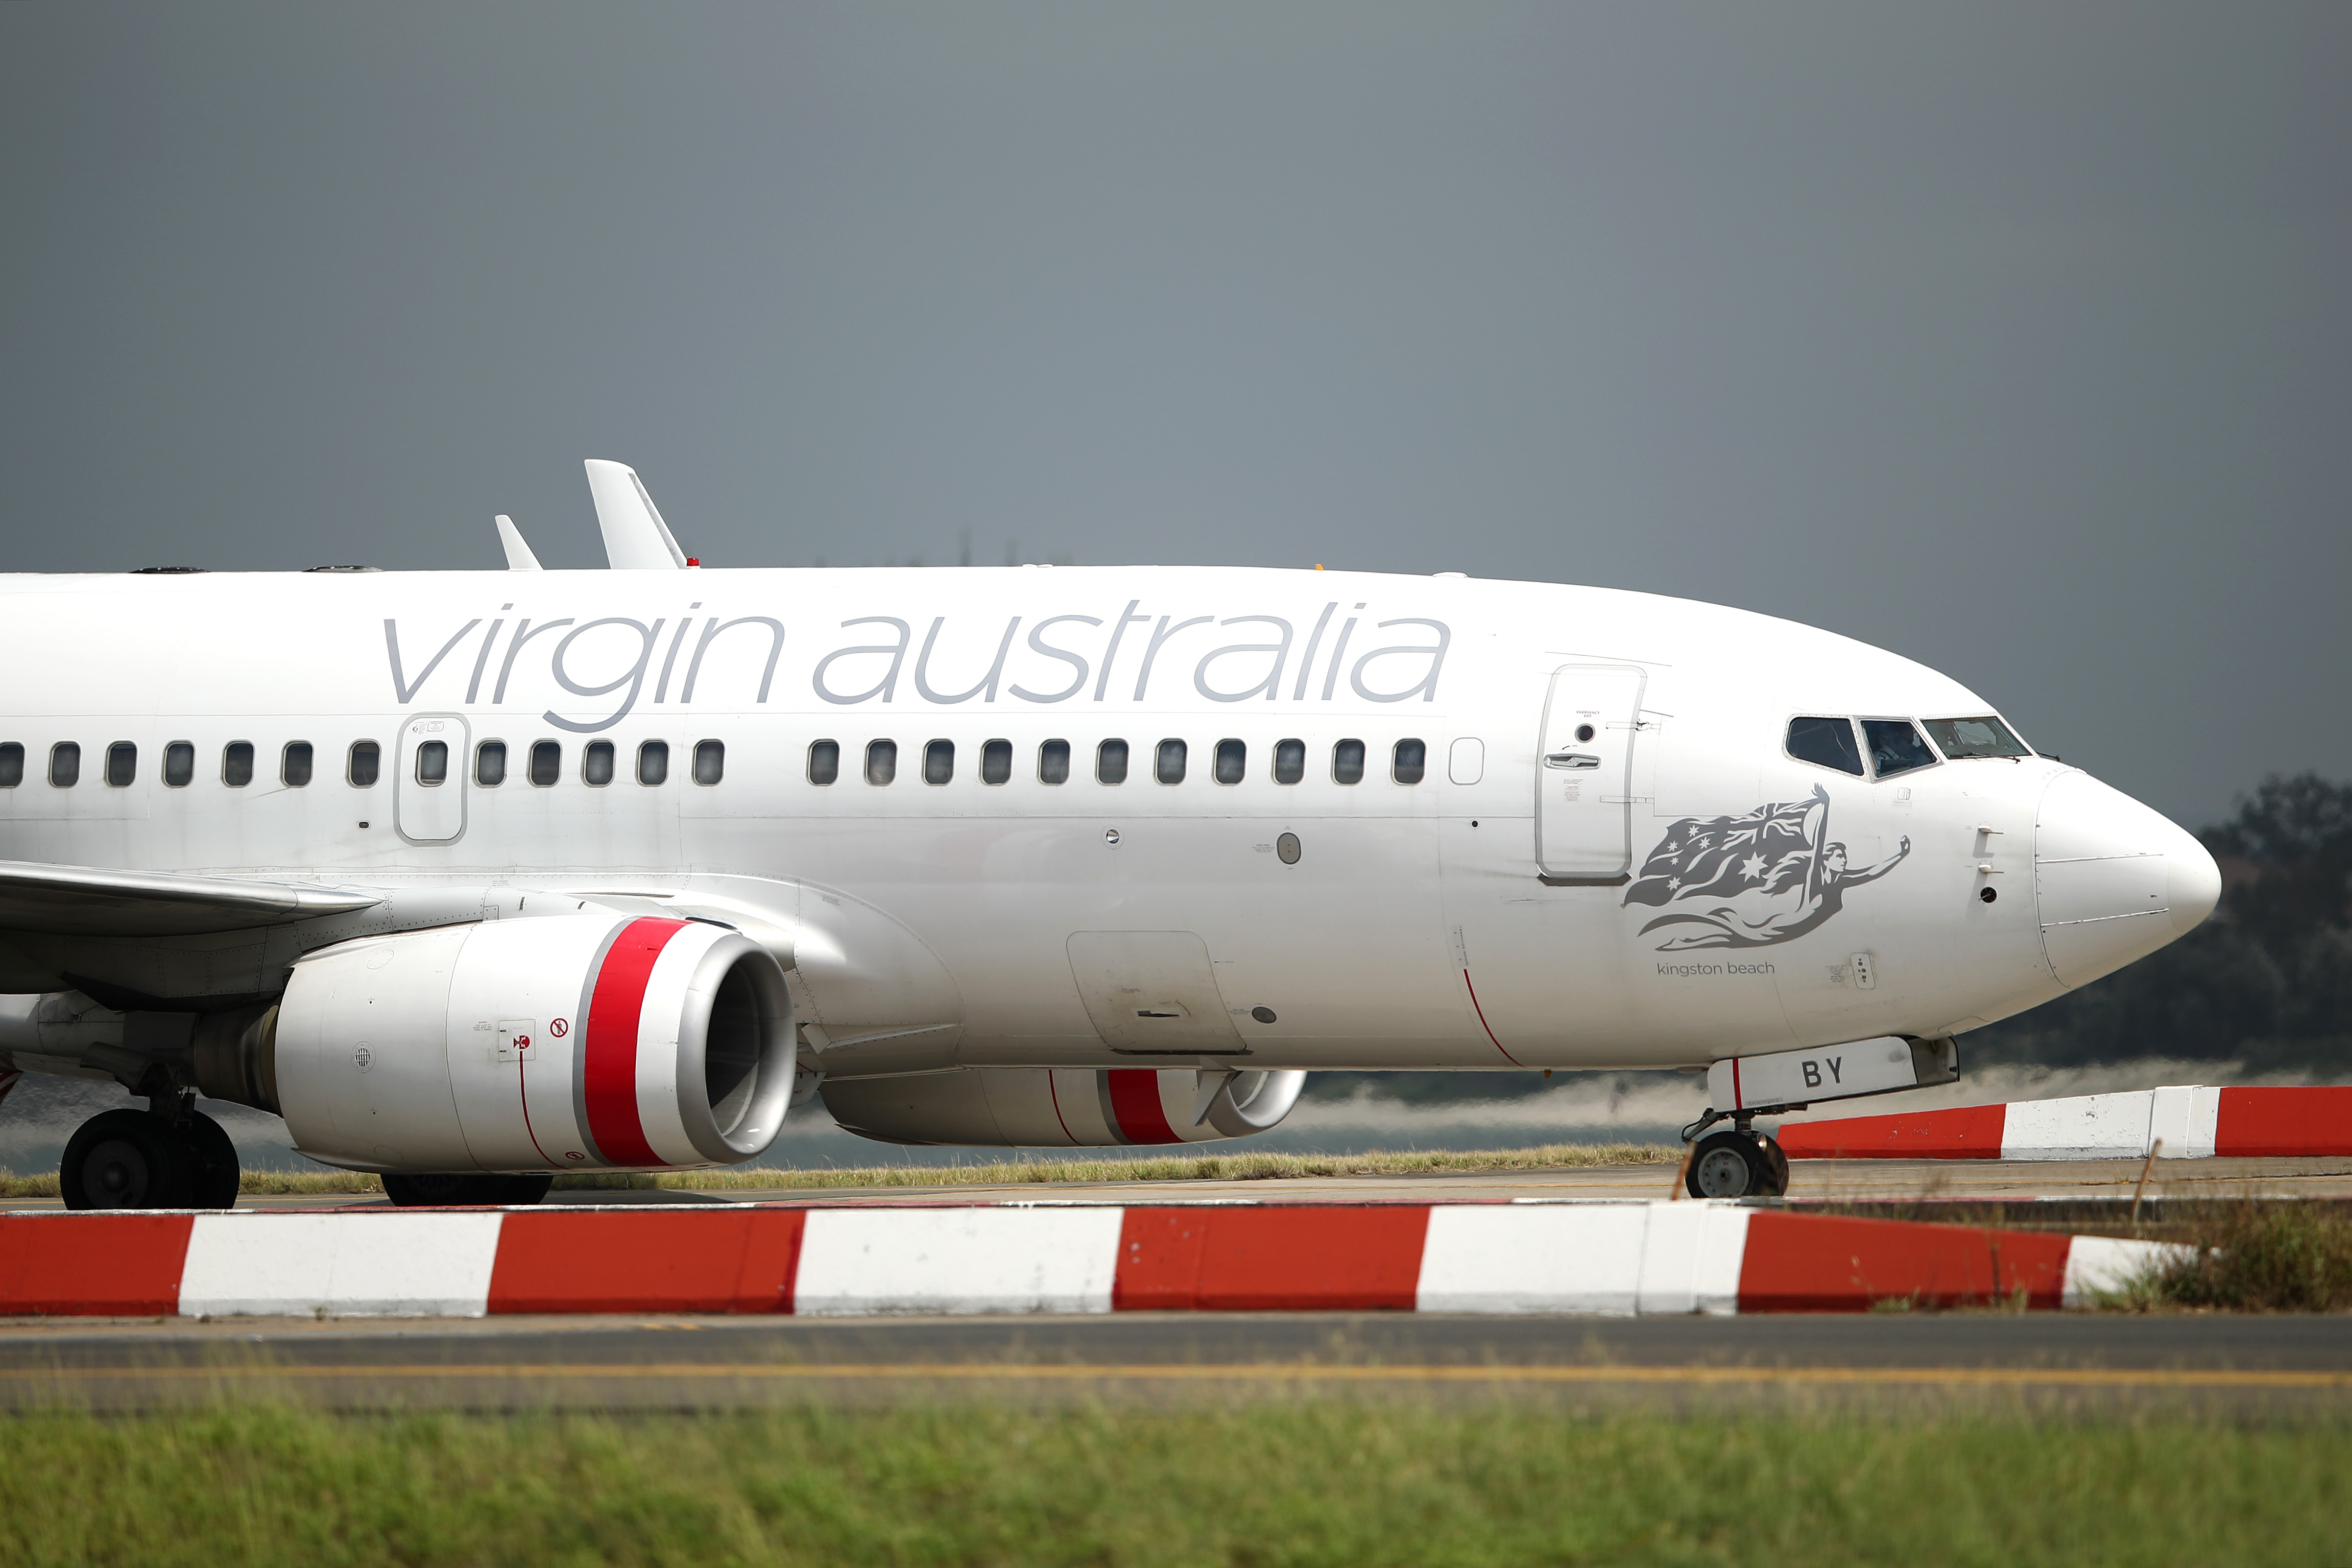 A Virgin Australia plane at Sydney Airport on March 14, 2019.